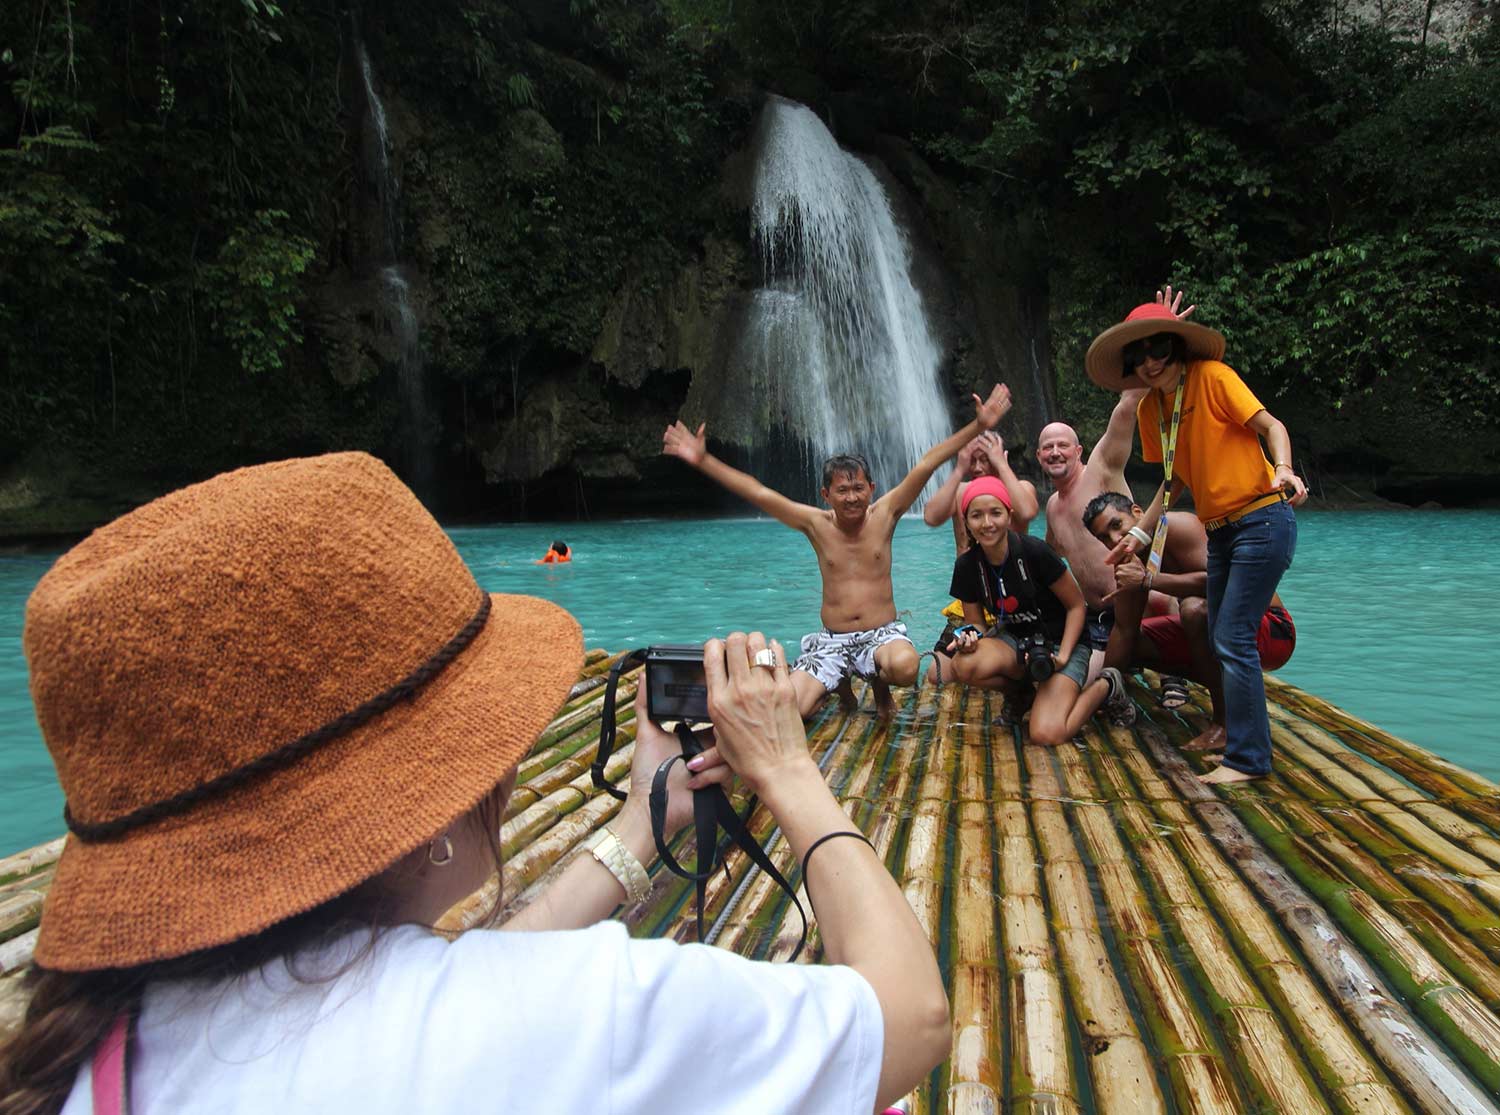 Cebu Governor Gwendolyn Garcia says she will not allow swimming yet on waterfalls visits but these areas are only for sightseeing. | CDN file photo